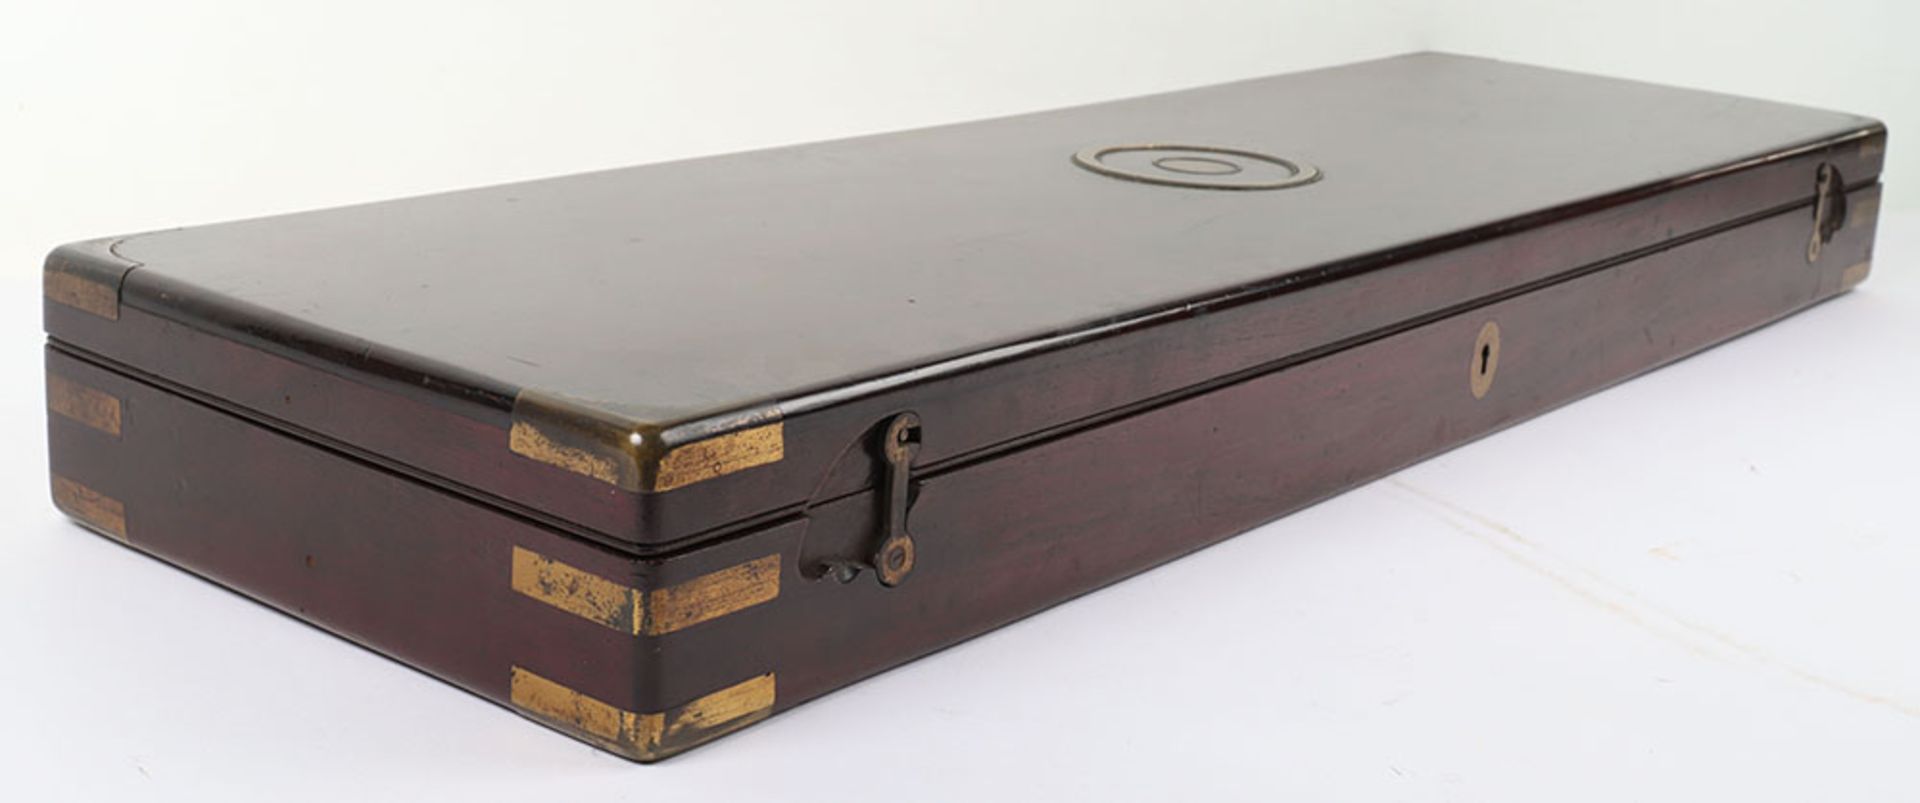 Good Brass Bound Mahogany Gun Case for a Double Barrel Percussion Gun or Rifle - Image 5 of 10